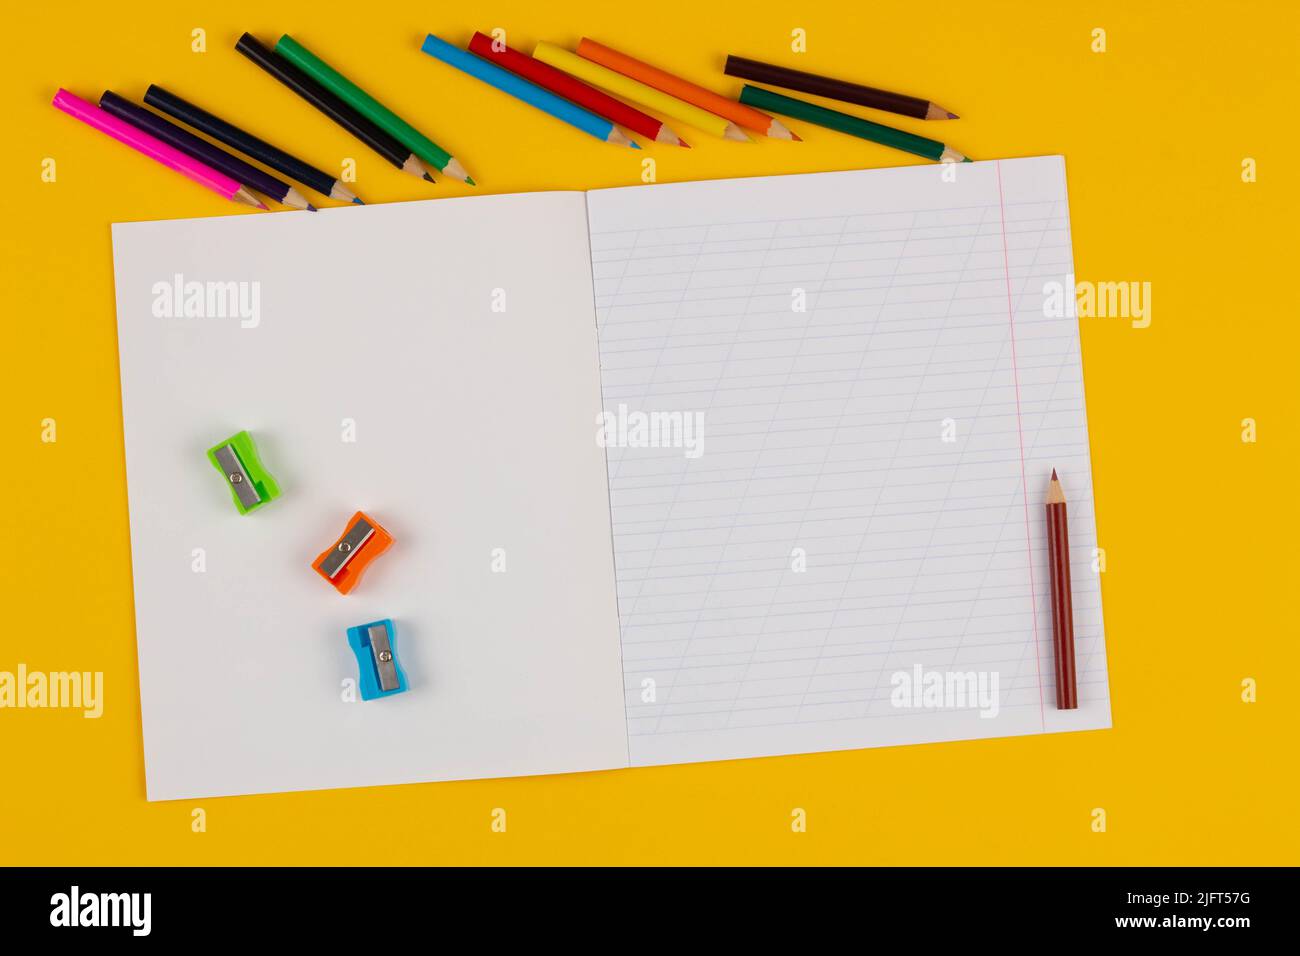 School notebook on a yellow background with copy space text, colorful pencils, pencil sharpeners. Back to school. Blank sheet of paper with oblique Stock Photo